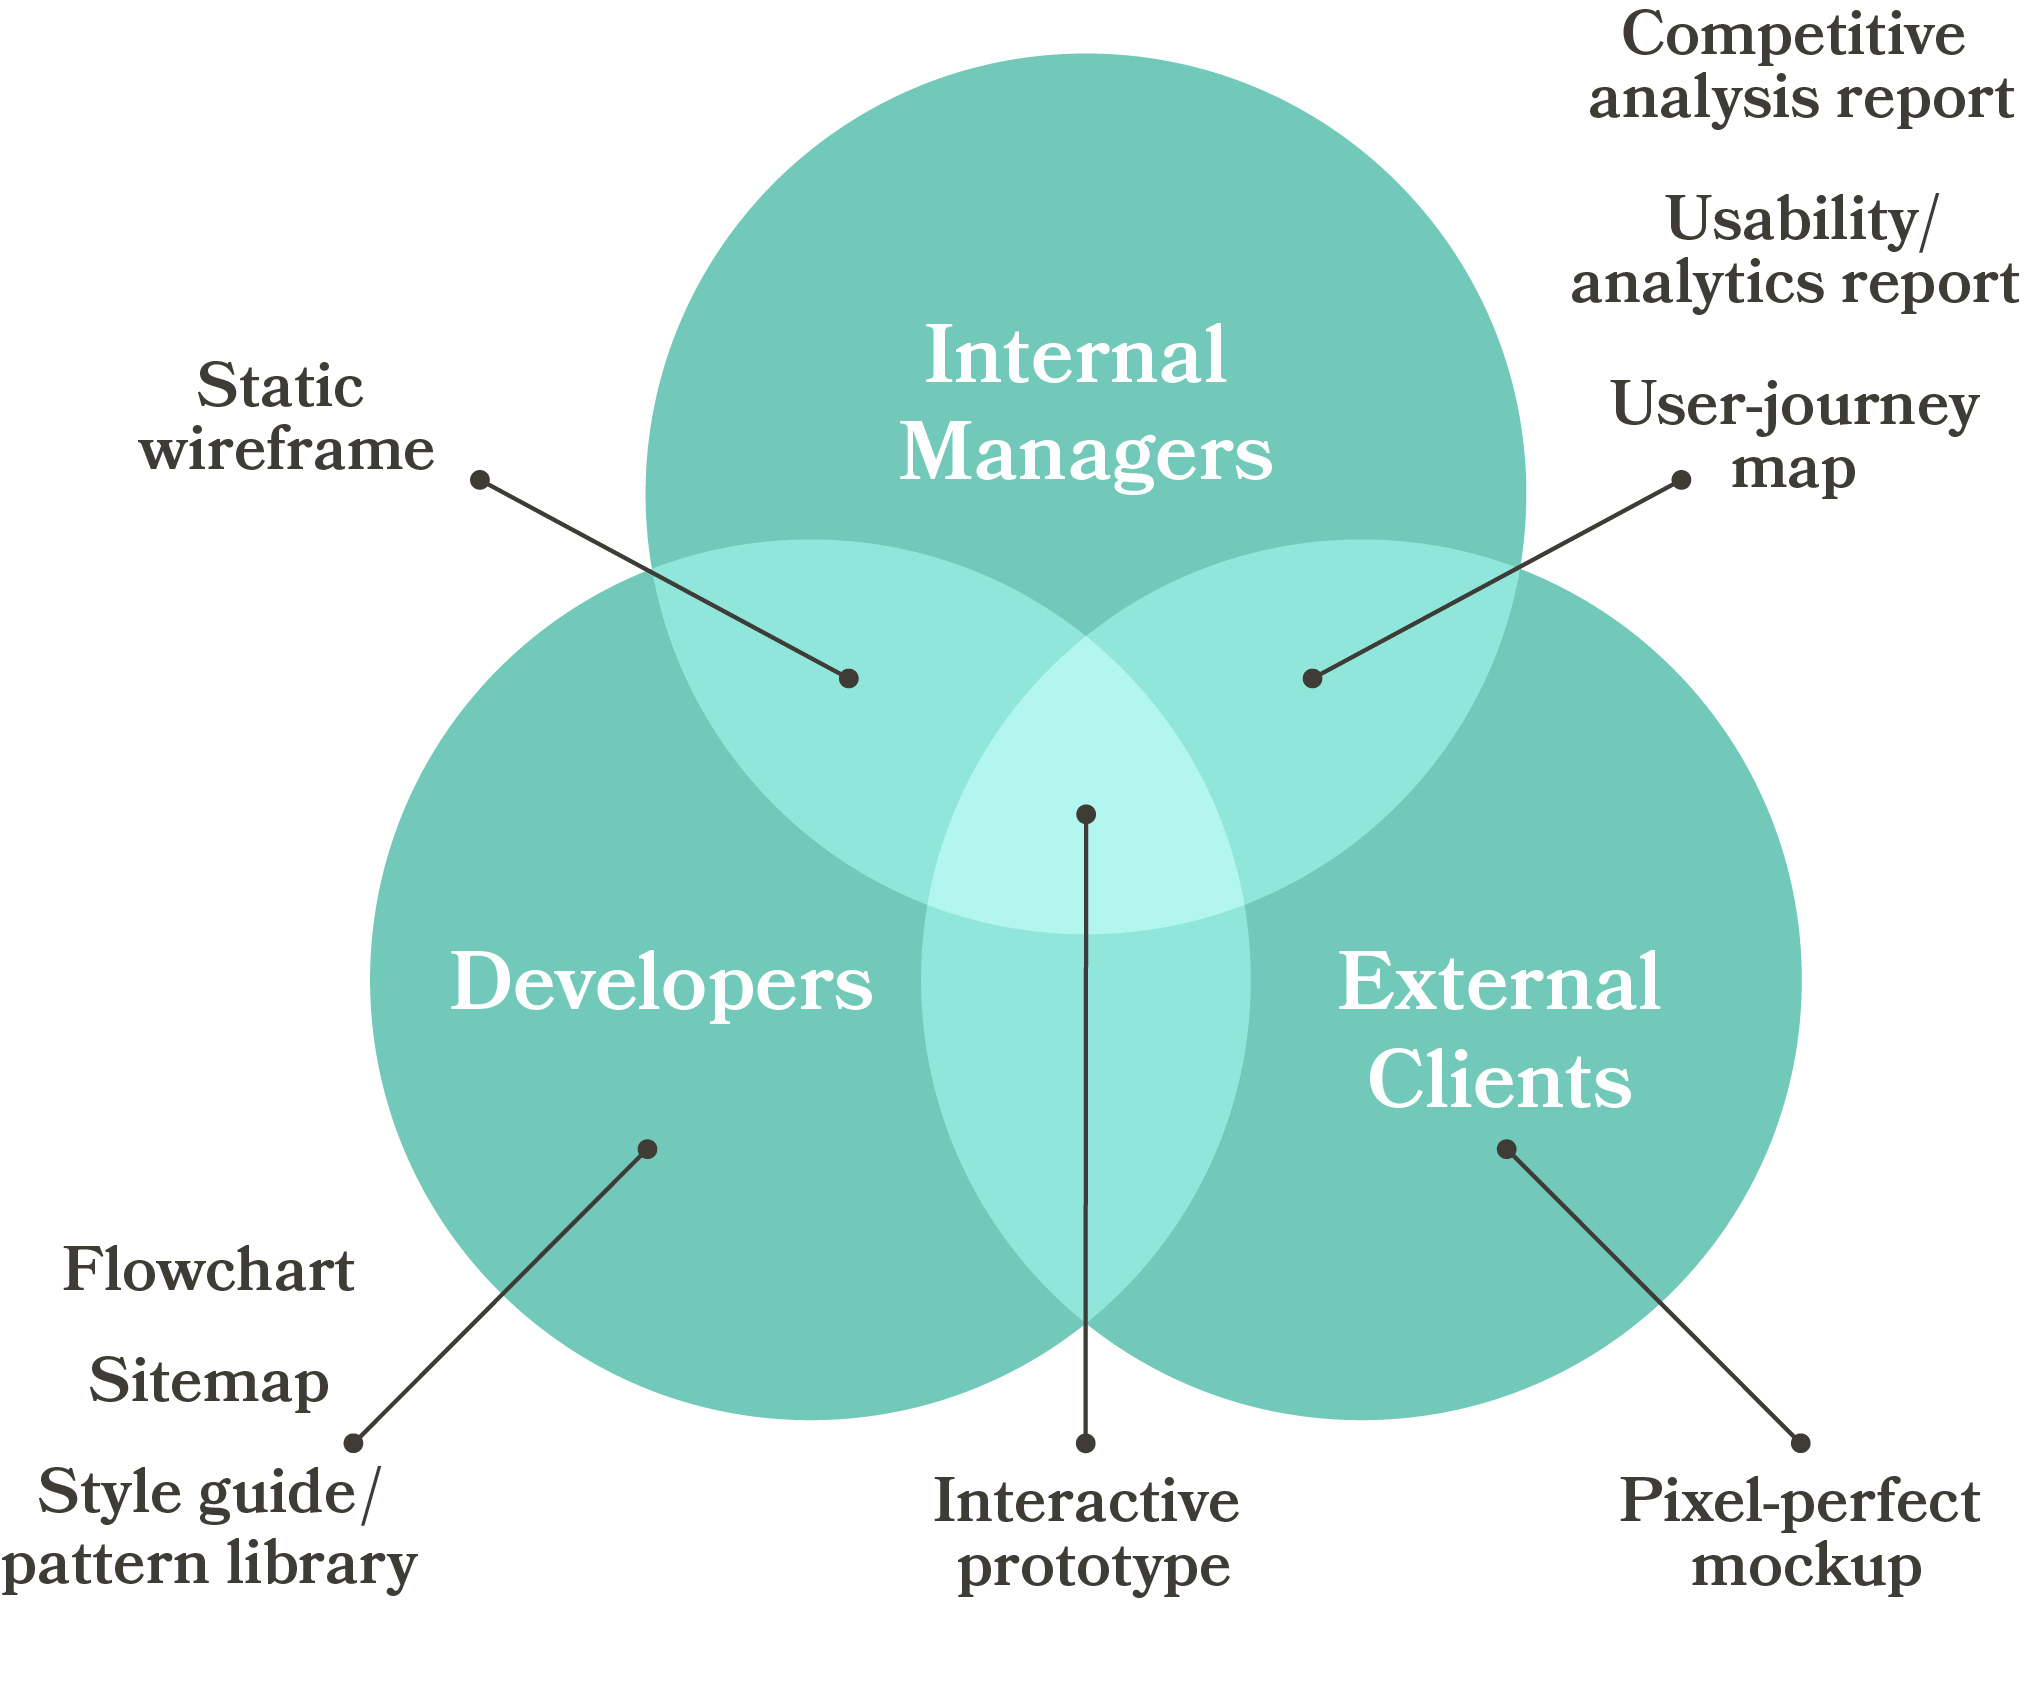 Venn diagram showing the types of UX deliverables appropriate to different audiences (adapted from nngroup - click for details)